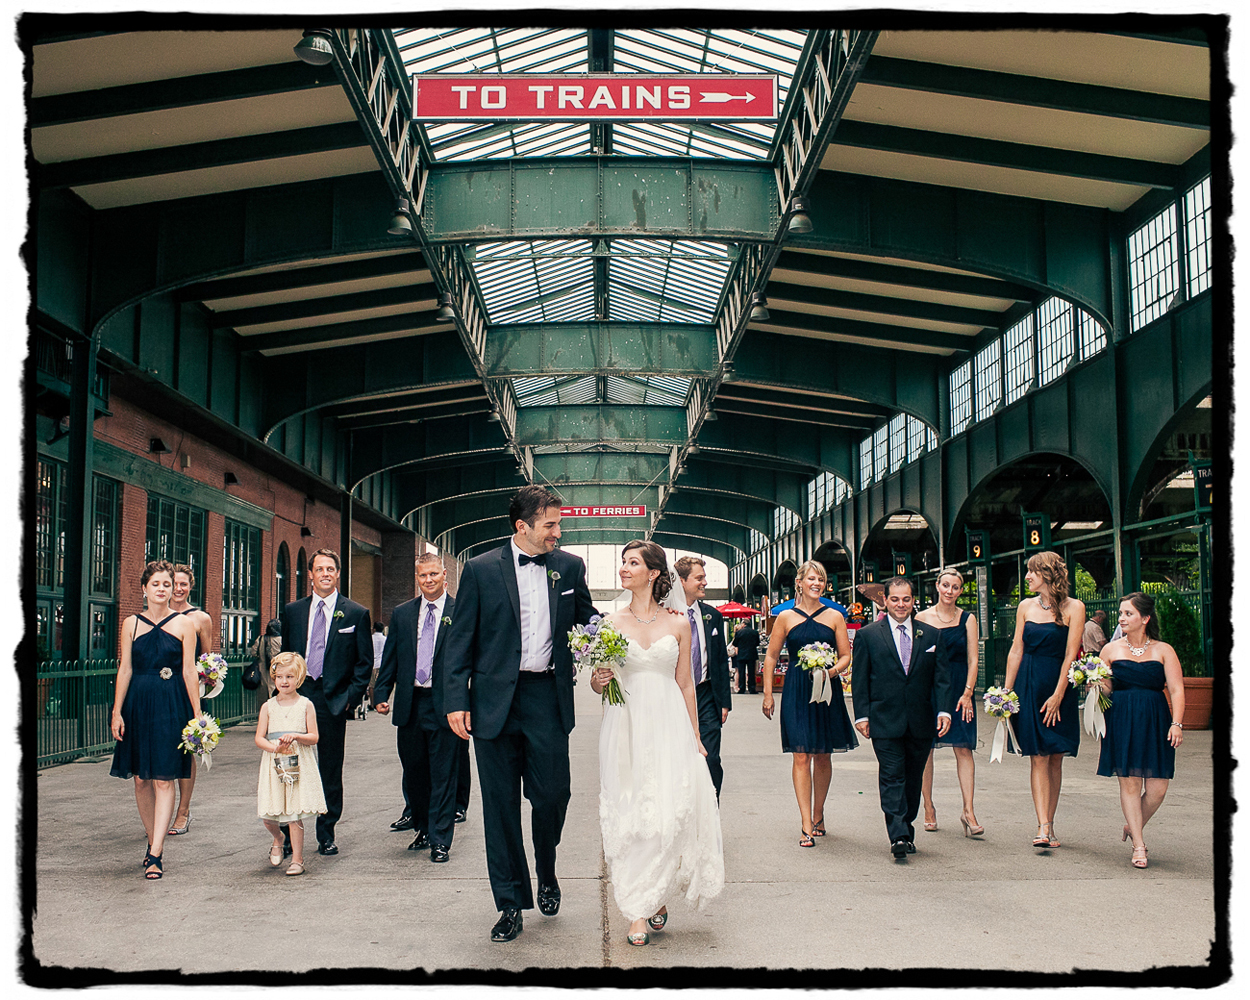 The old train station museum made a wonderful backdrop for a walking shot with this fun bridal party.